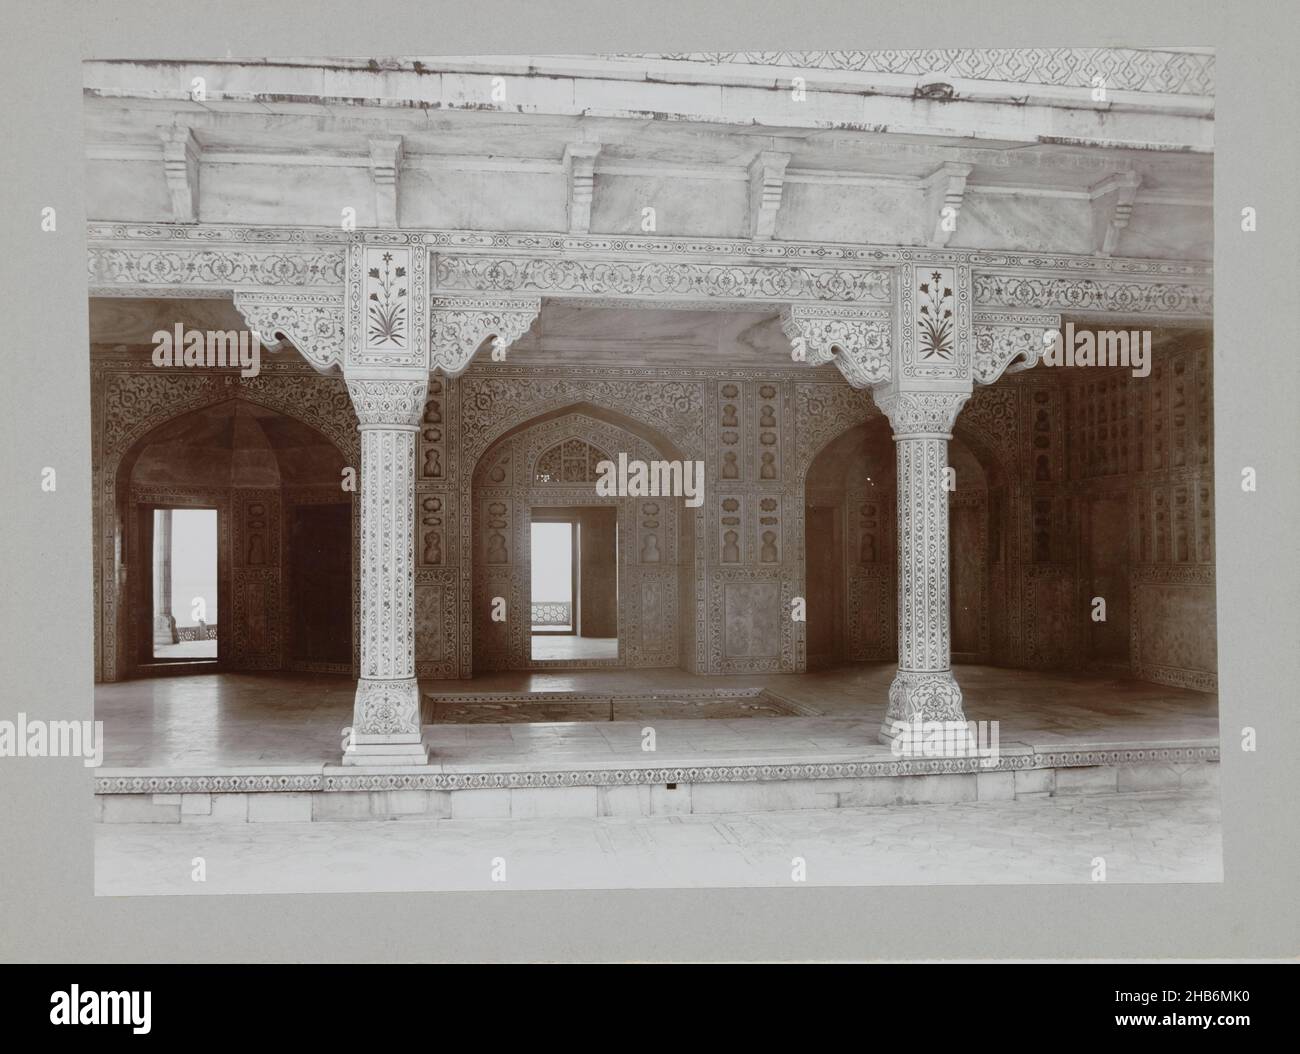 Inside of Musamman Burj, Inside of the tower Musamman Burj which is part of the Fort of Agra, a fountain can be seen in the middle of the floor., anonymous, Agra, c. 1895 - c. 1915, paper, cardboard, height 210 mm × width 282 mmheight 244 mm × width 329 mm Stock Photo